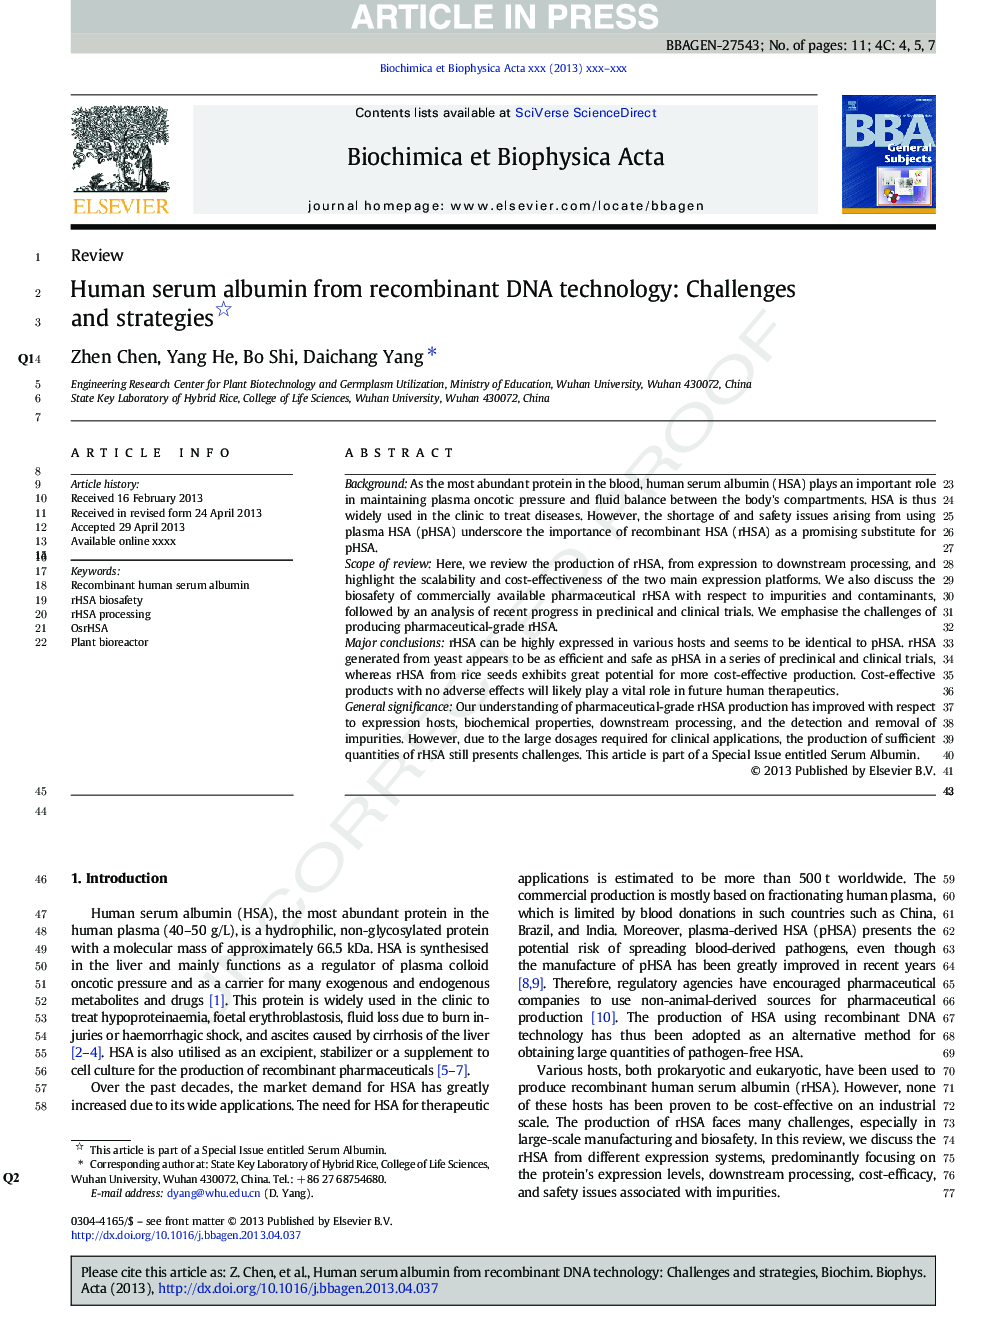 Human serum albumin from recombinant DNA technology: Challenges and strategies